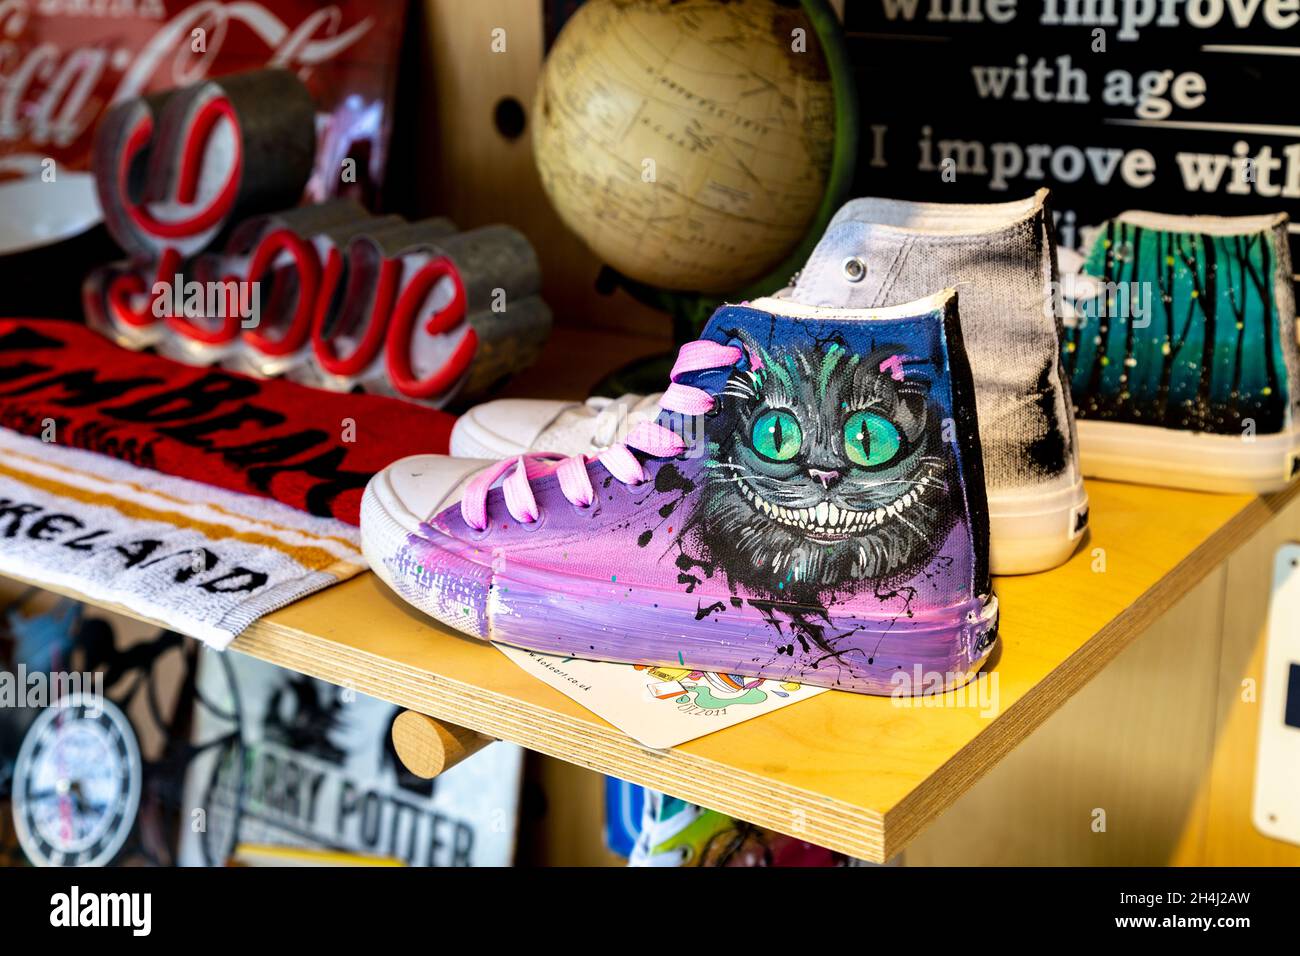 Handcrafted items, Cheshire Cat sneakers at Buck Street Market, Camden, London, UK Stock Photo